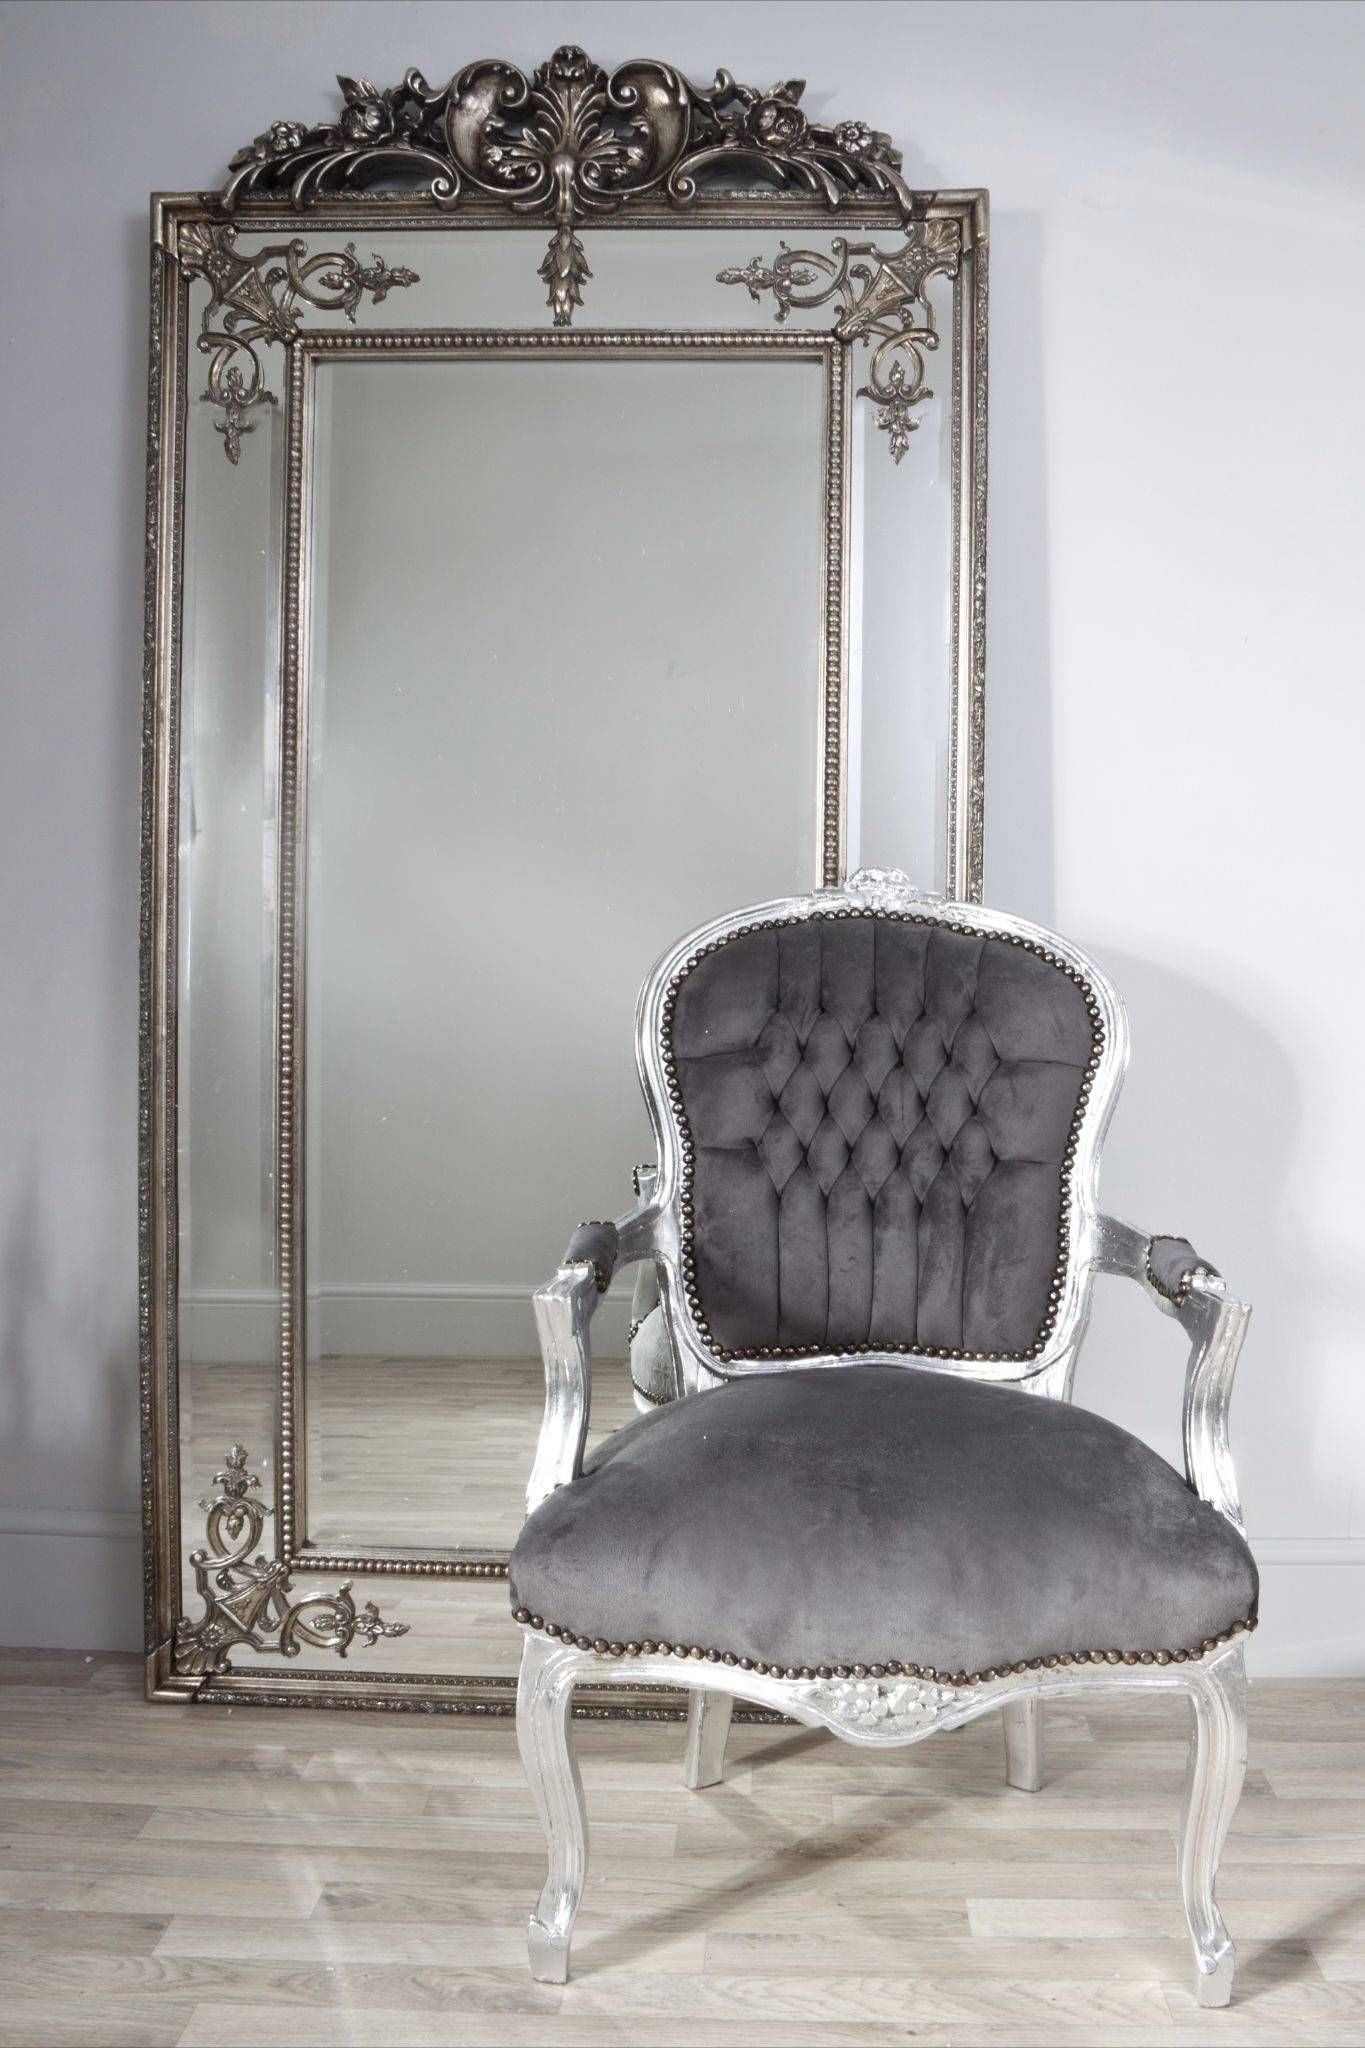 Large Ornate Floor Mirror: Reflect Your Style And Beauty